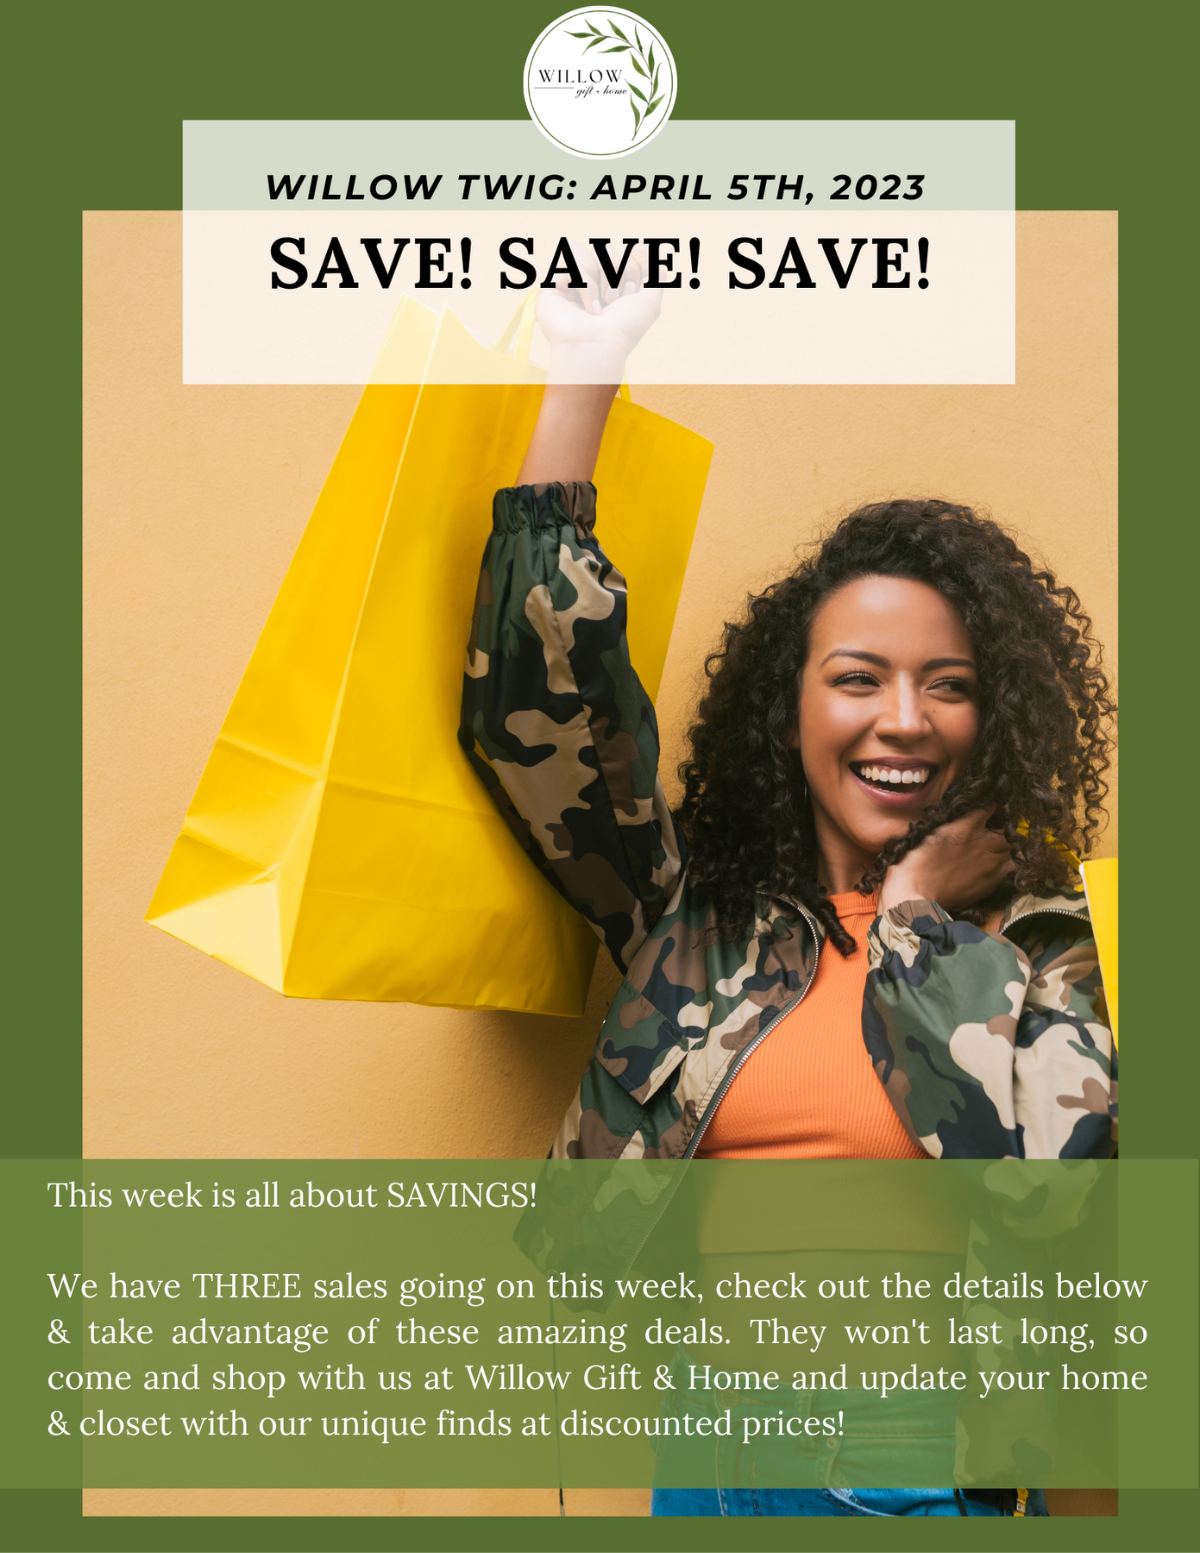 This week is all about savings at Willow